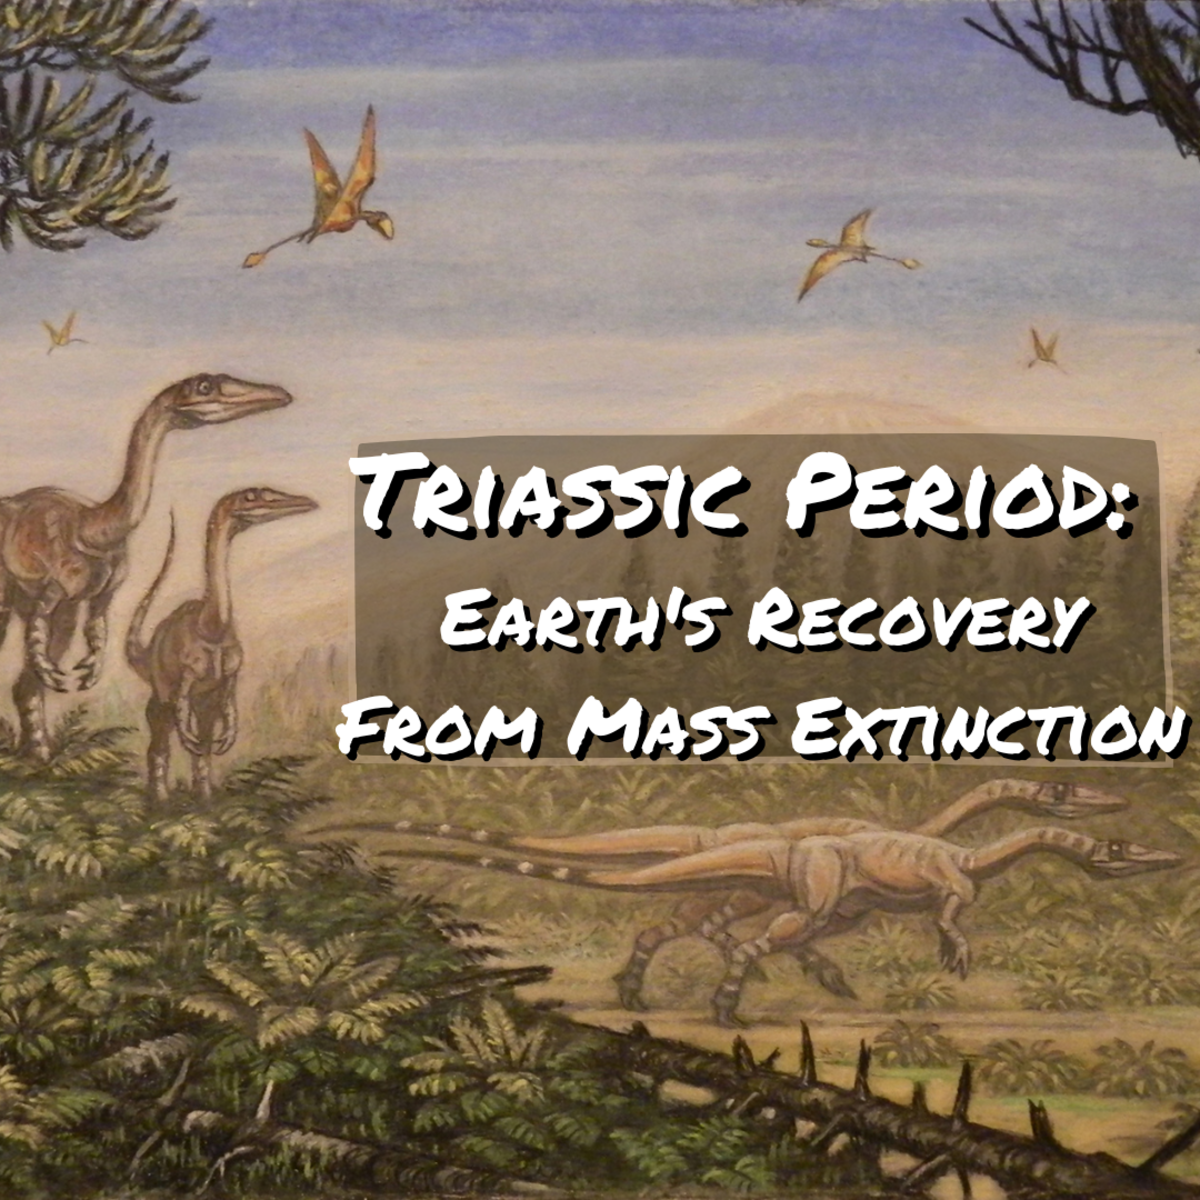 Read on to learn all about the Triassic Period, a time when the Earth recovered from a major mass extinction event.